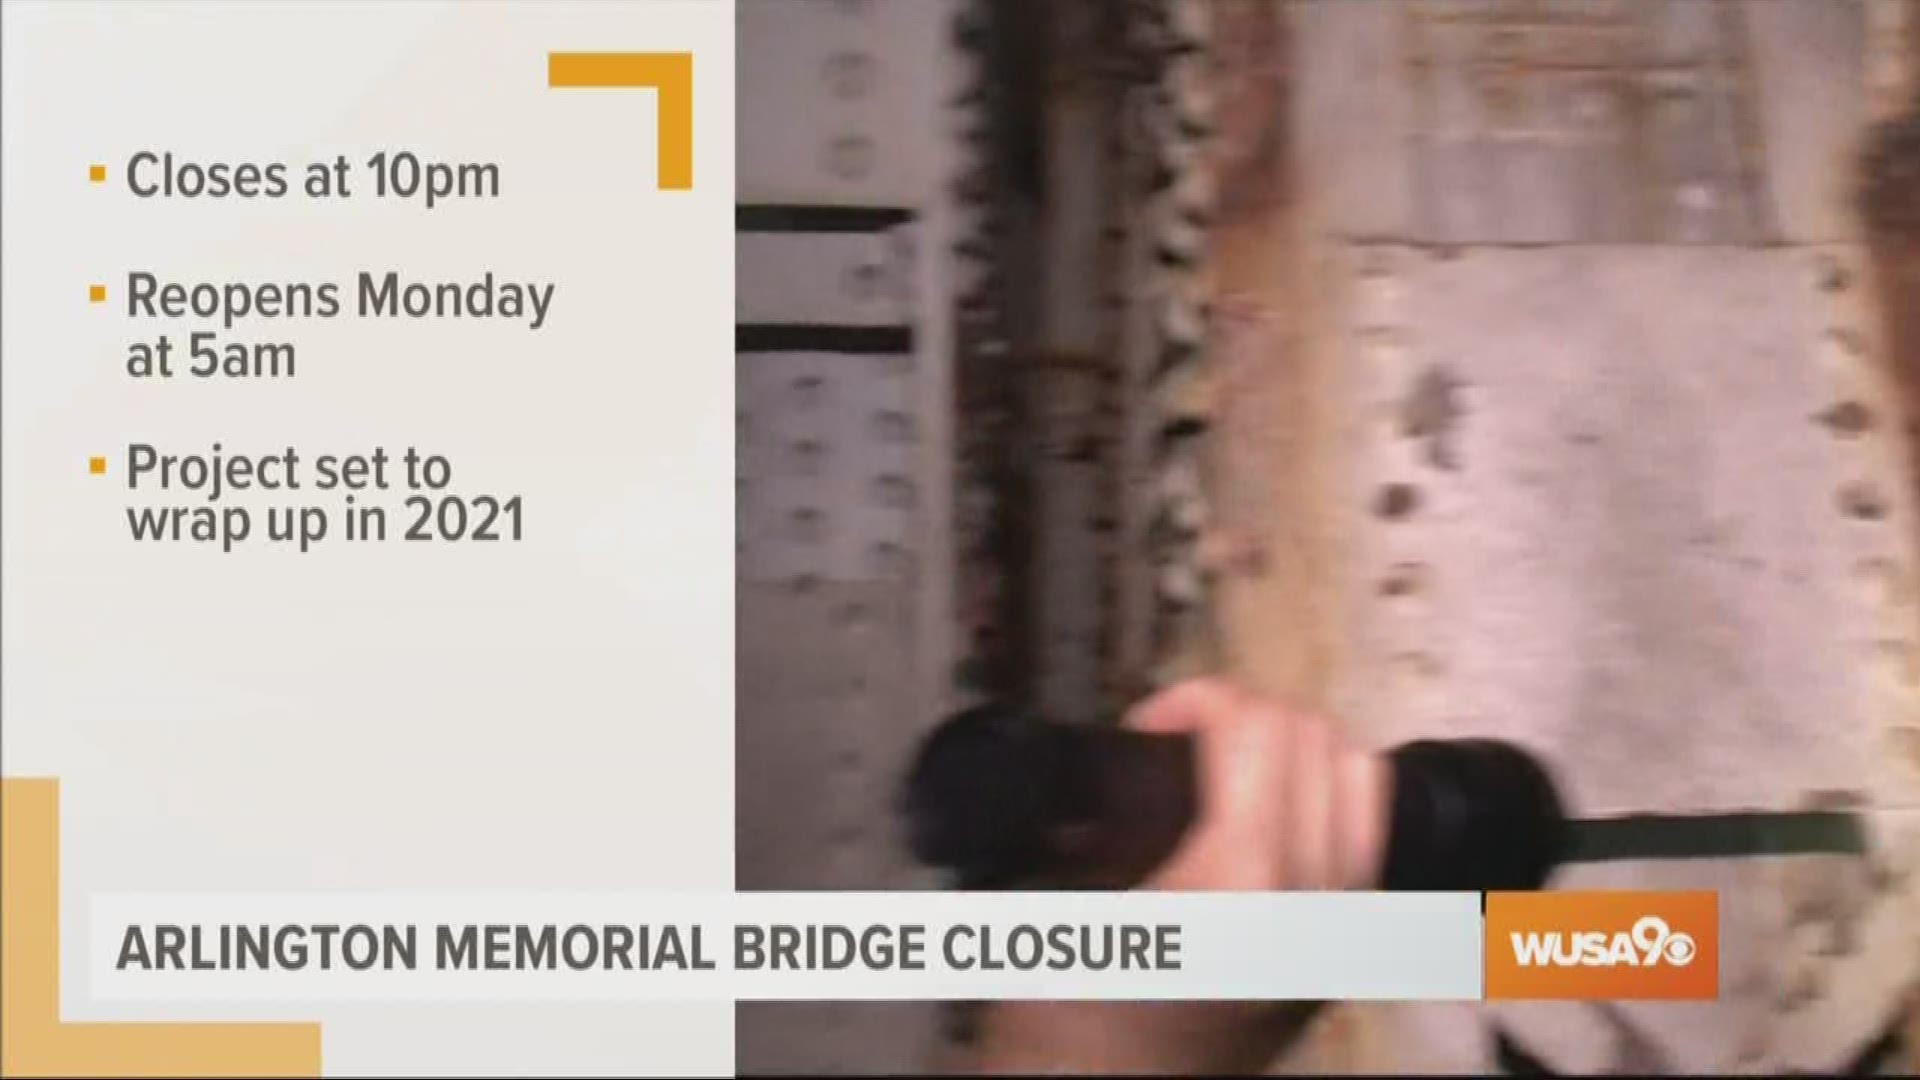 You may want to avoid the Memorial Bridge this weekend. It will be closed to all traffic starting late Friday evening.